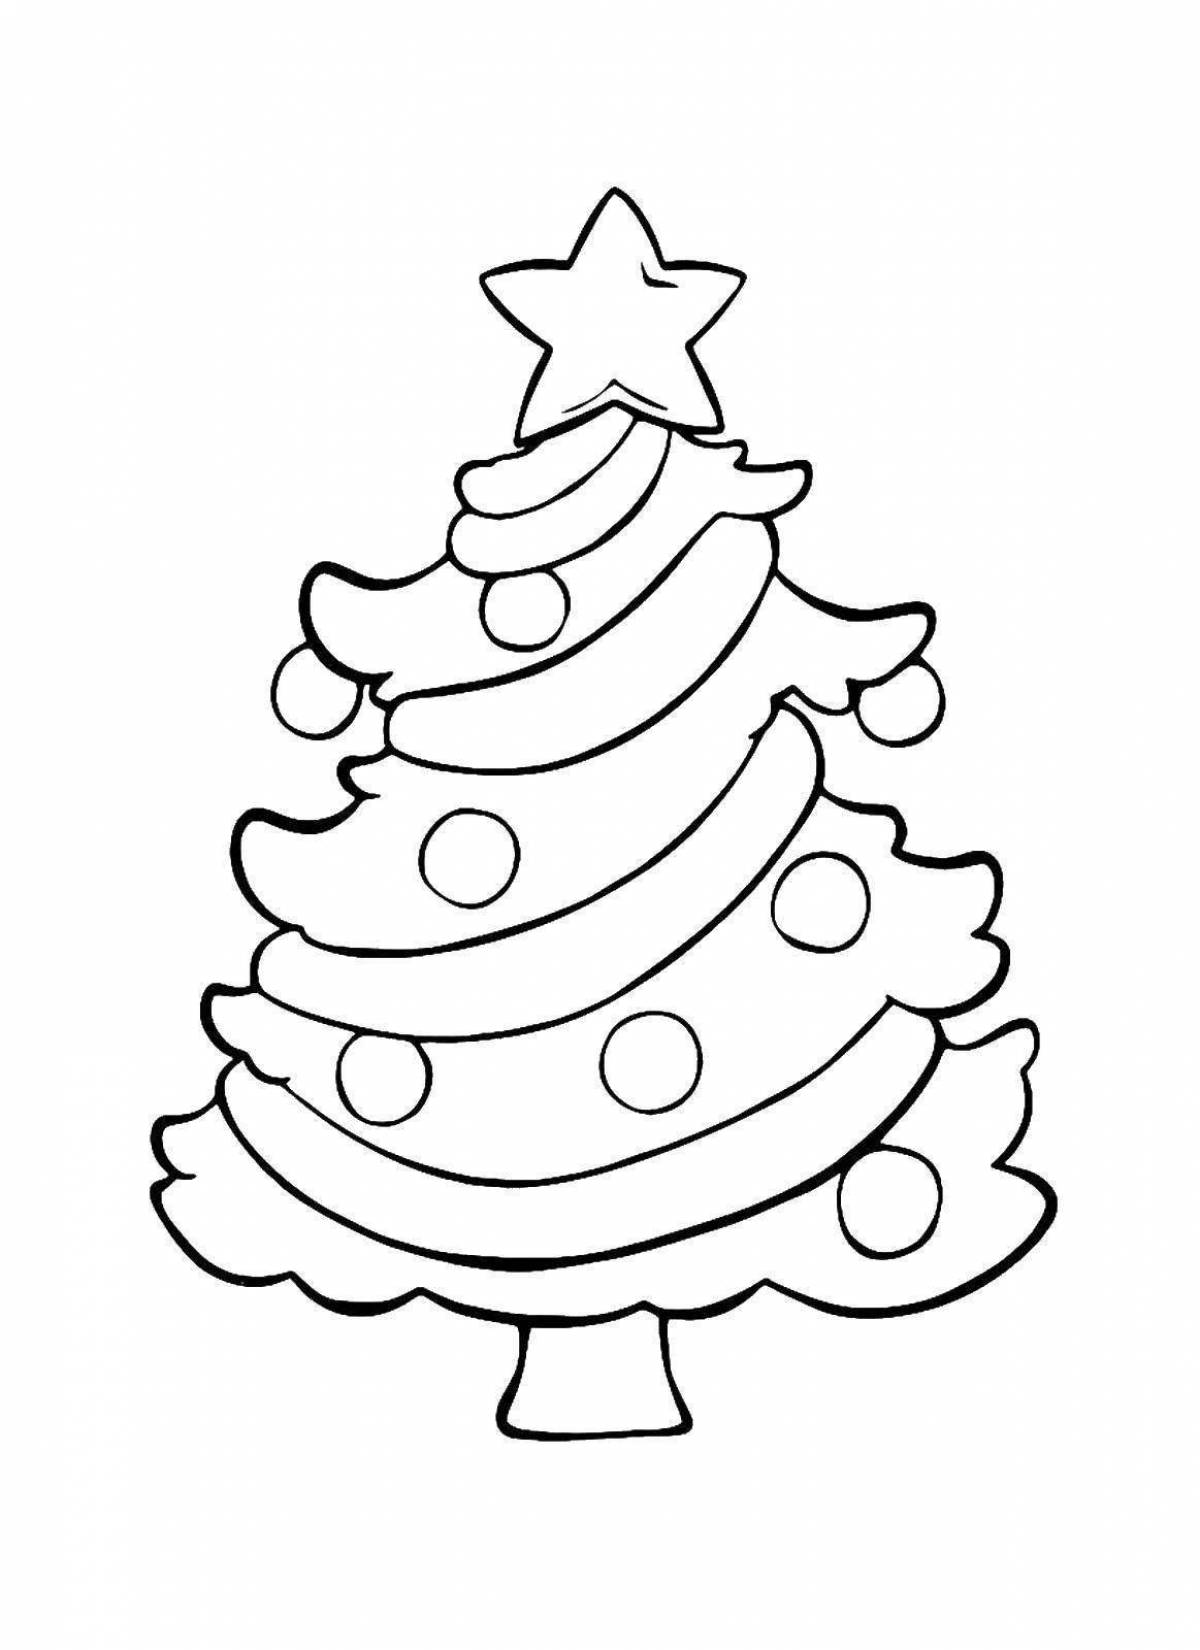 Christmas tree coloring book for children 5-6 years old